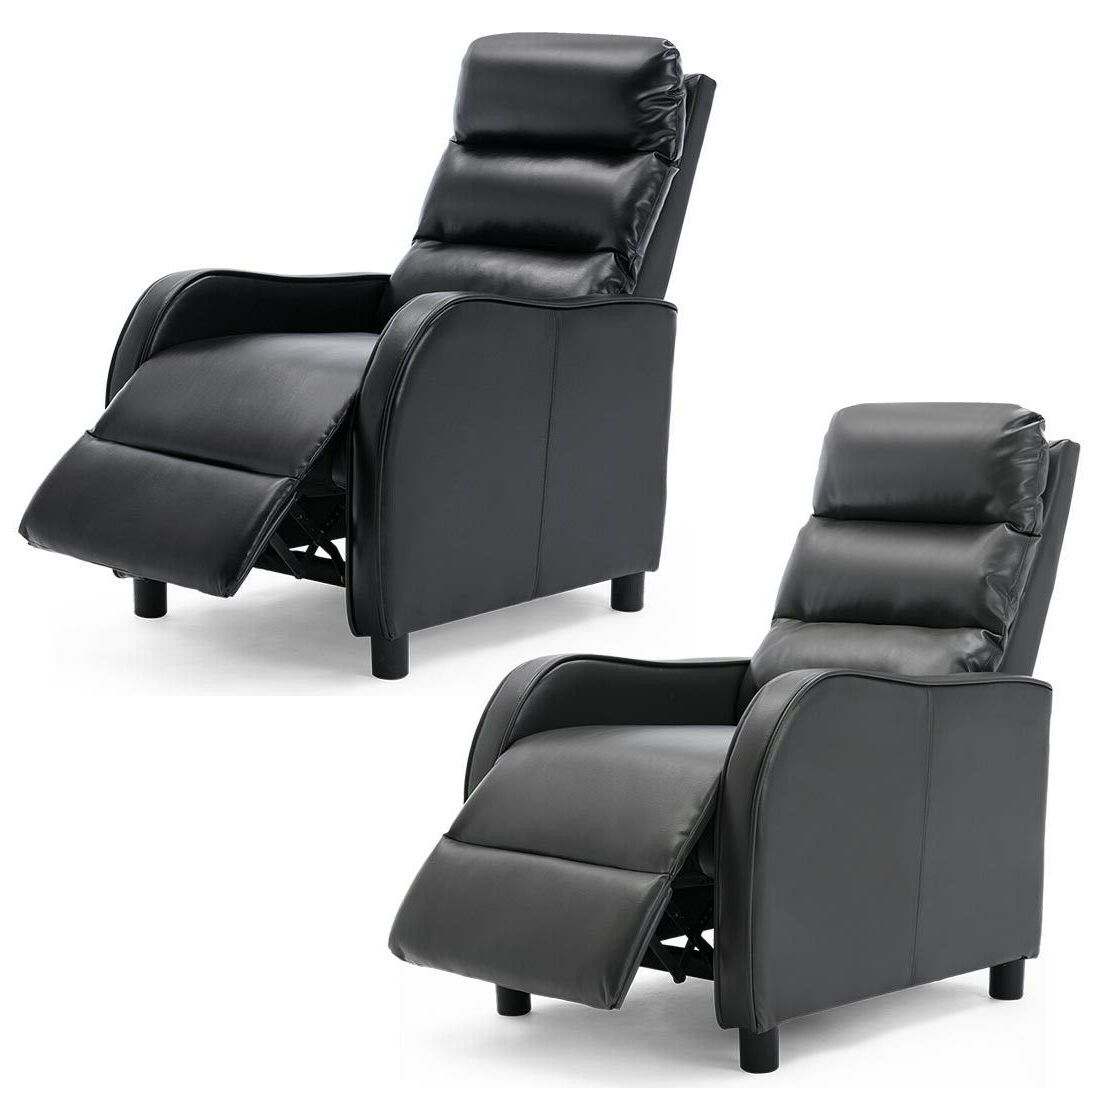 Selby Gaming Pushback Bonded Leather Recliner Chair Sofa Armcahir Within Best And Newest Selby Armchairs (View 11 of 20)